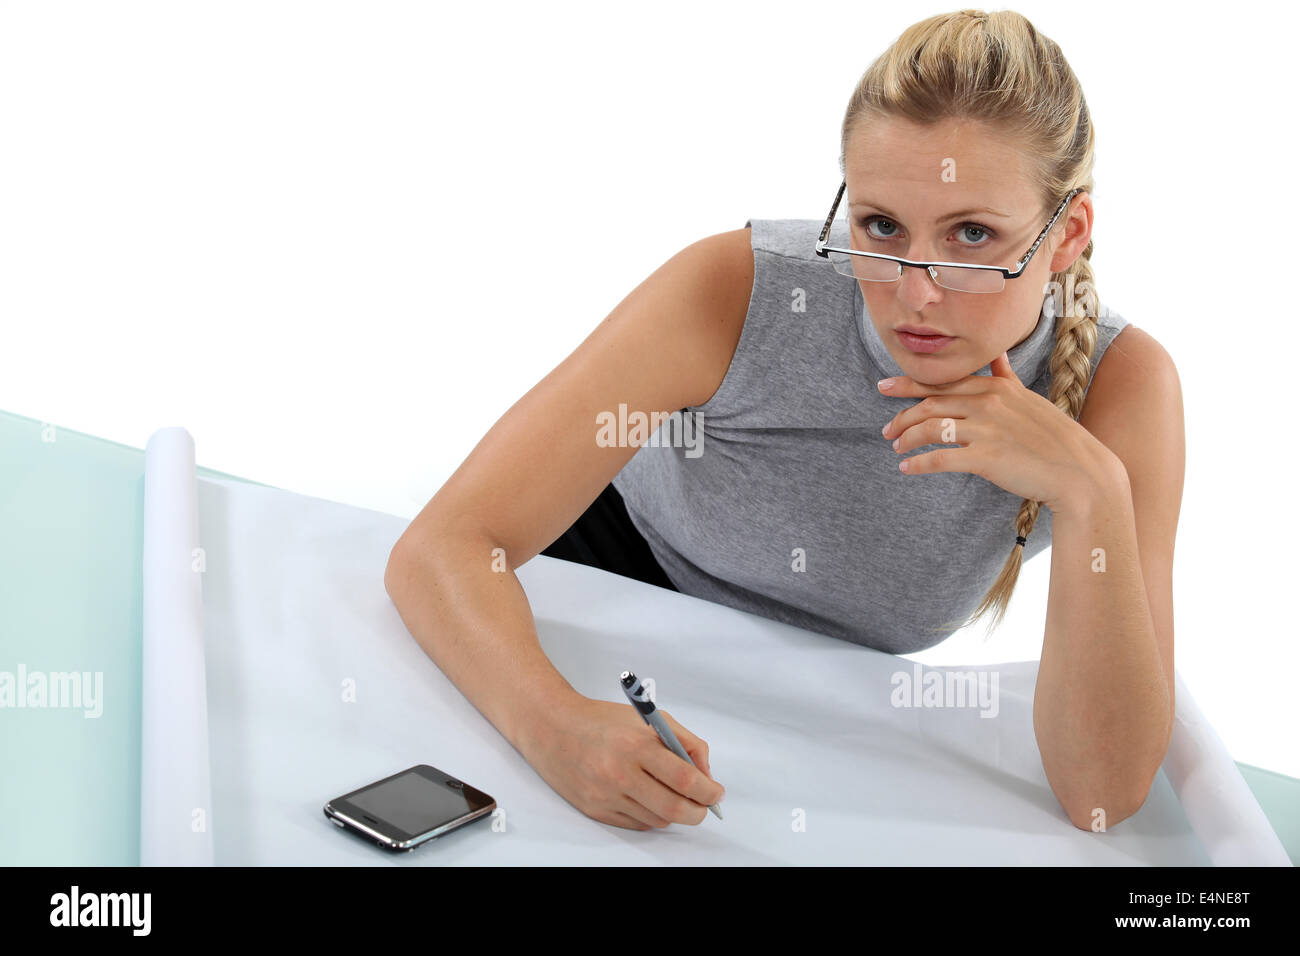 Woman drawing on sheet of paper Stock Photo